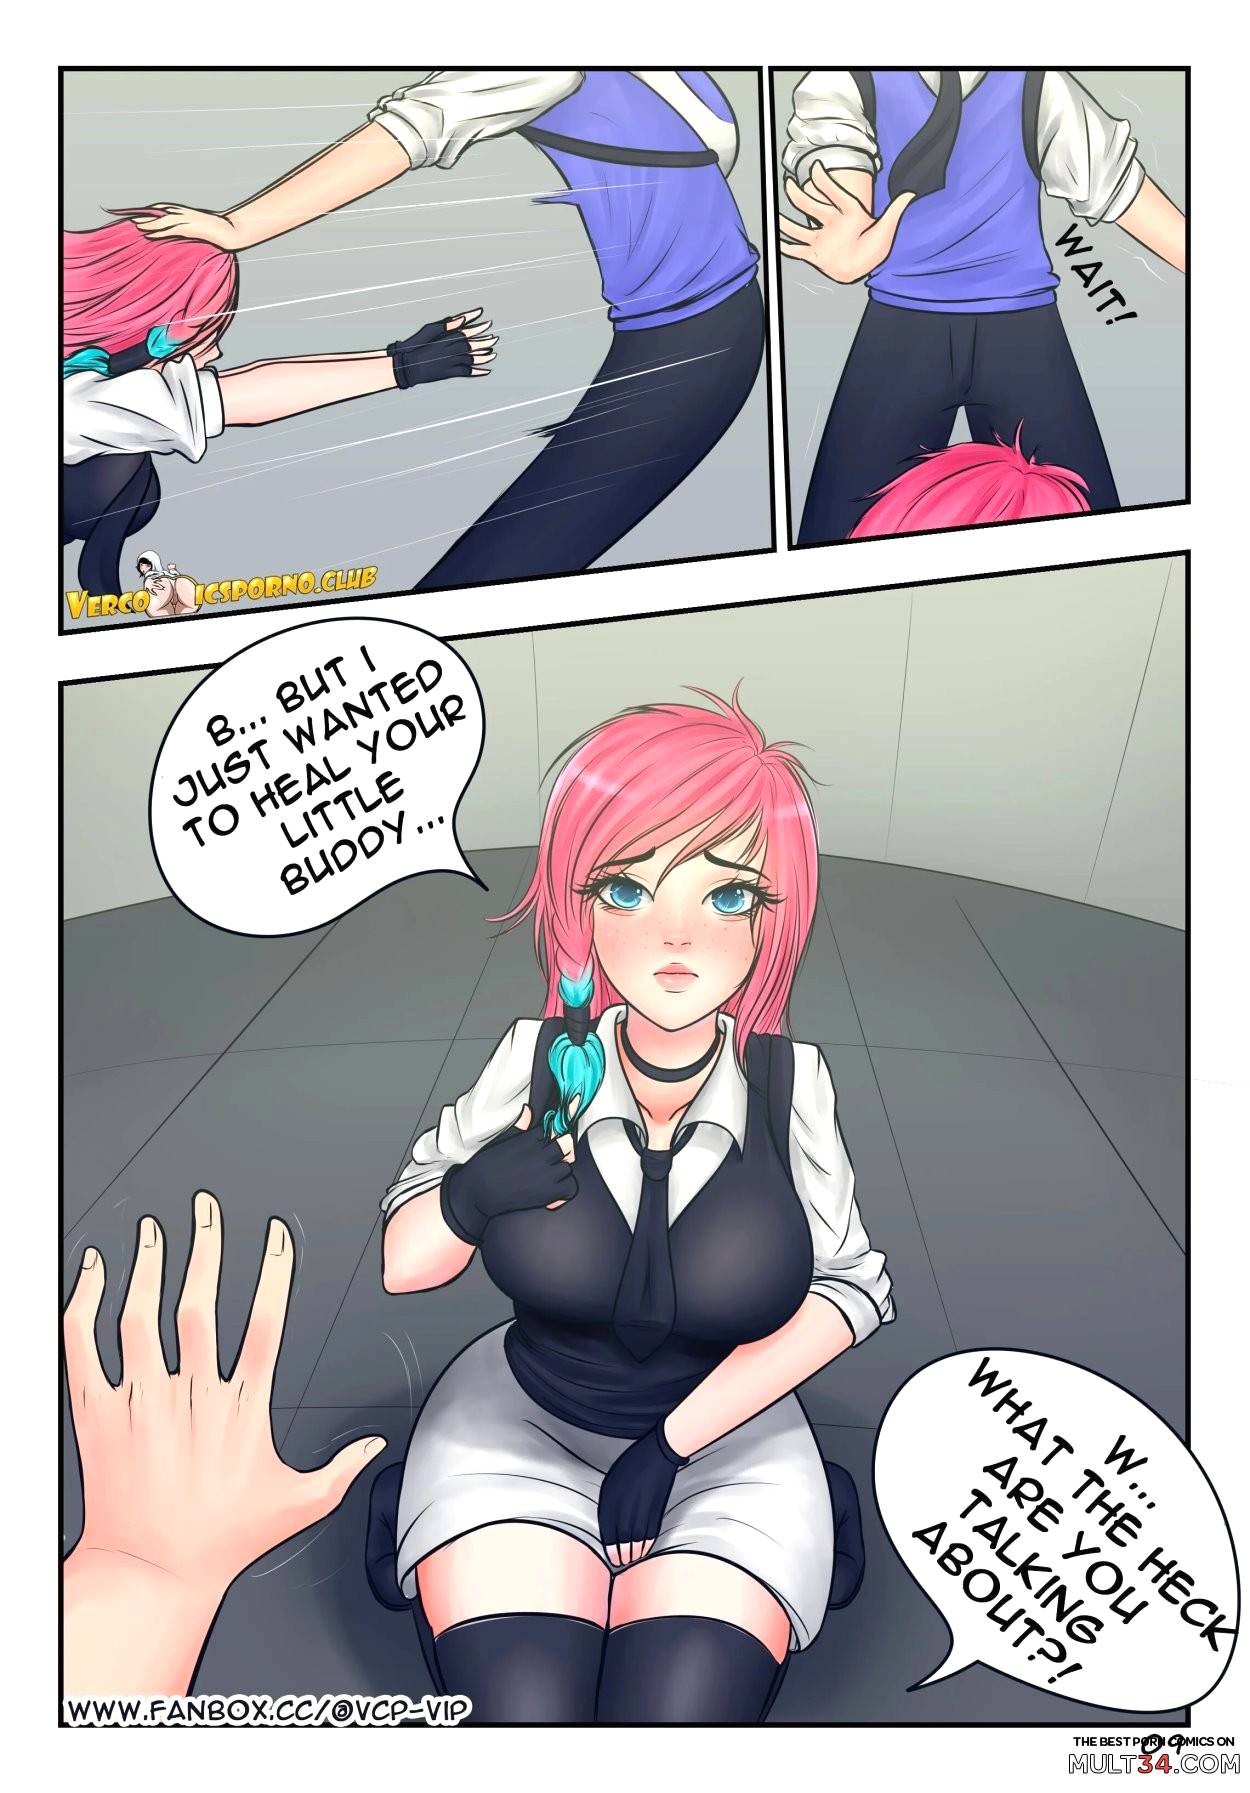 SexPoints Academy page 10